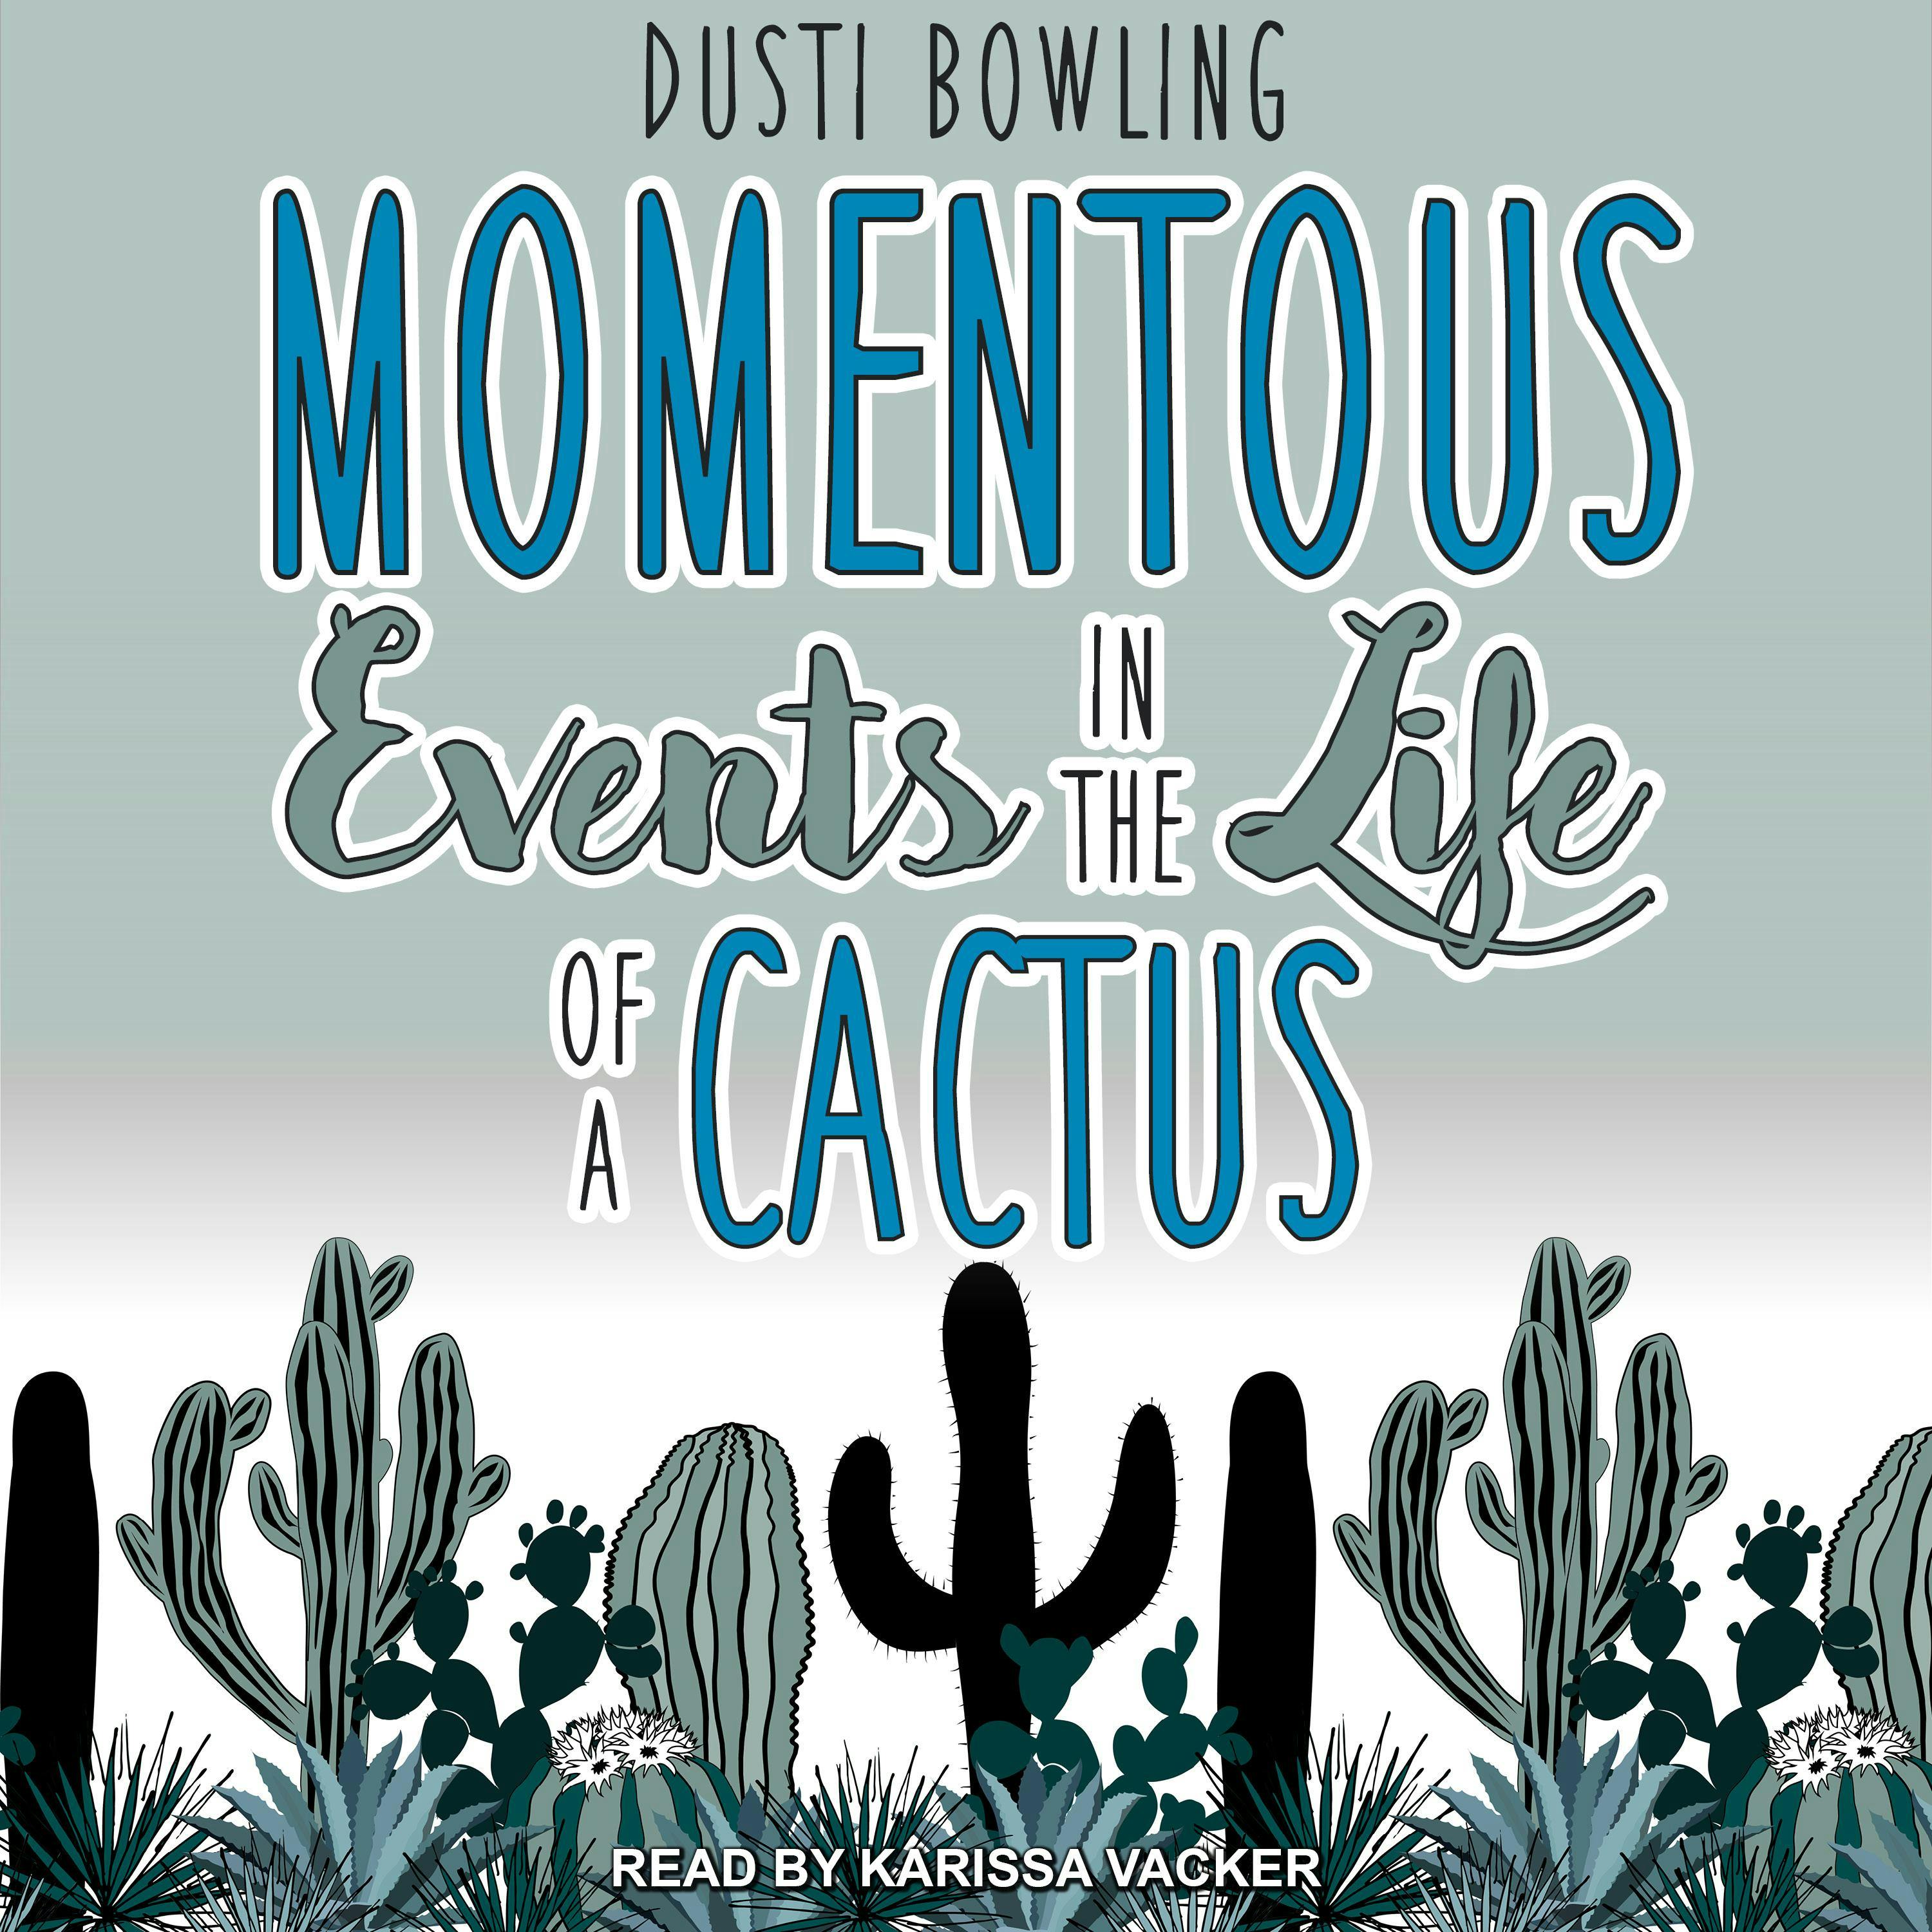 Momentous Events in the Life of a Cactus - Dusti Bowling